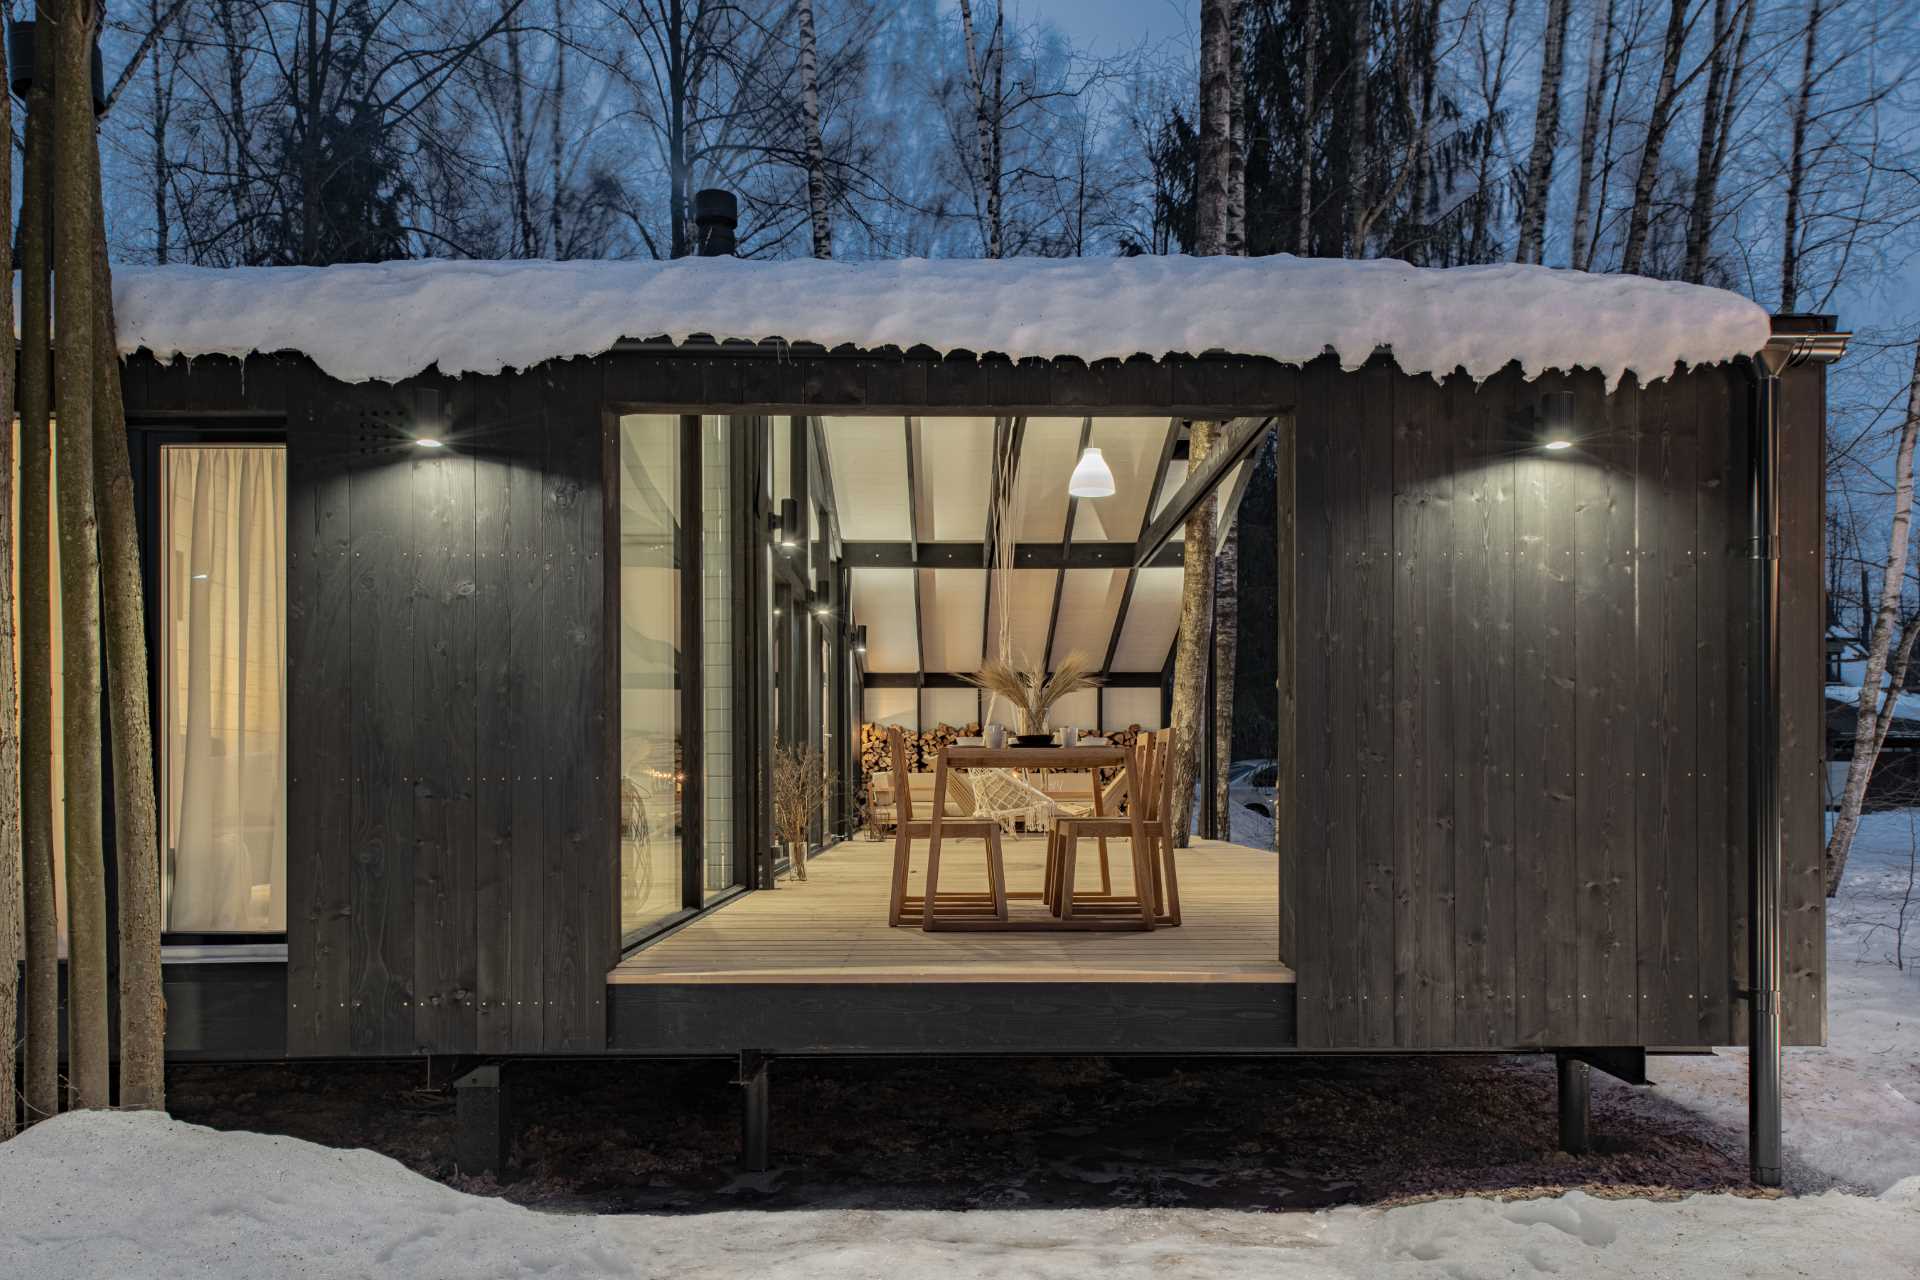 A modular home with a covered outdoor space for entertaining and storing wood.